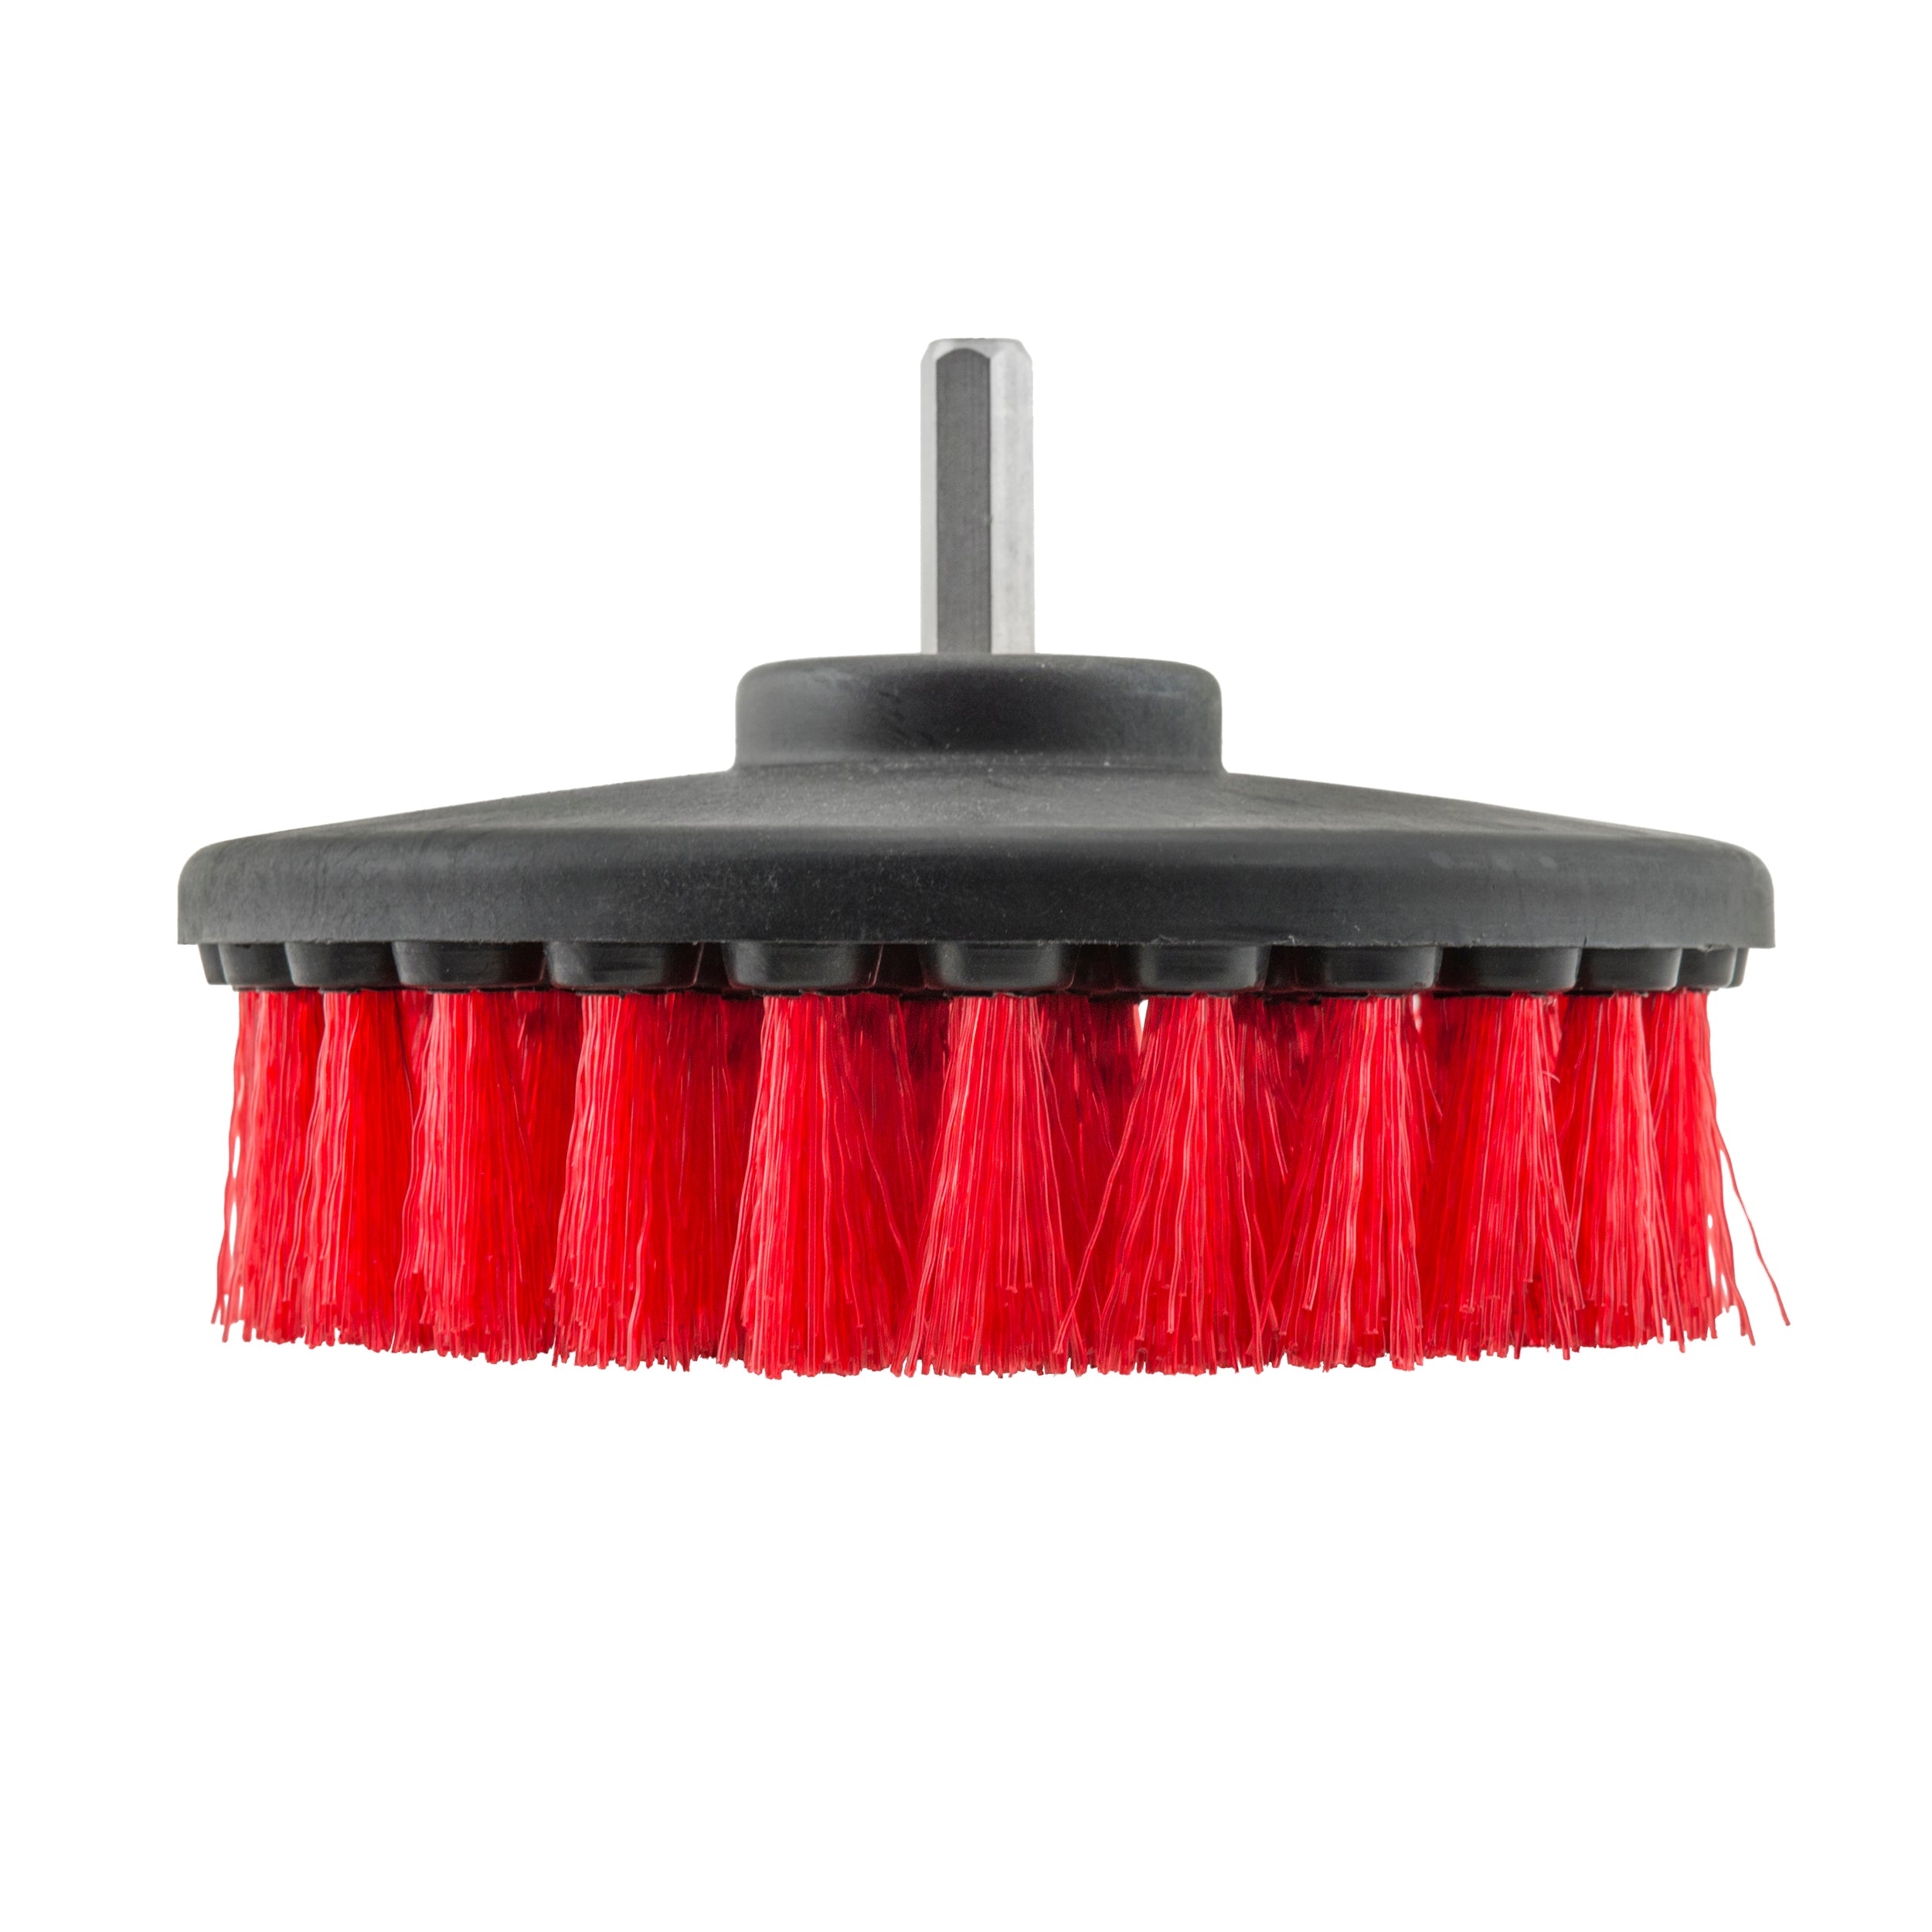 Carpet Brush With Drill Attachment (Red) – Chemical Guys